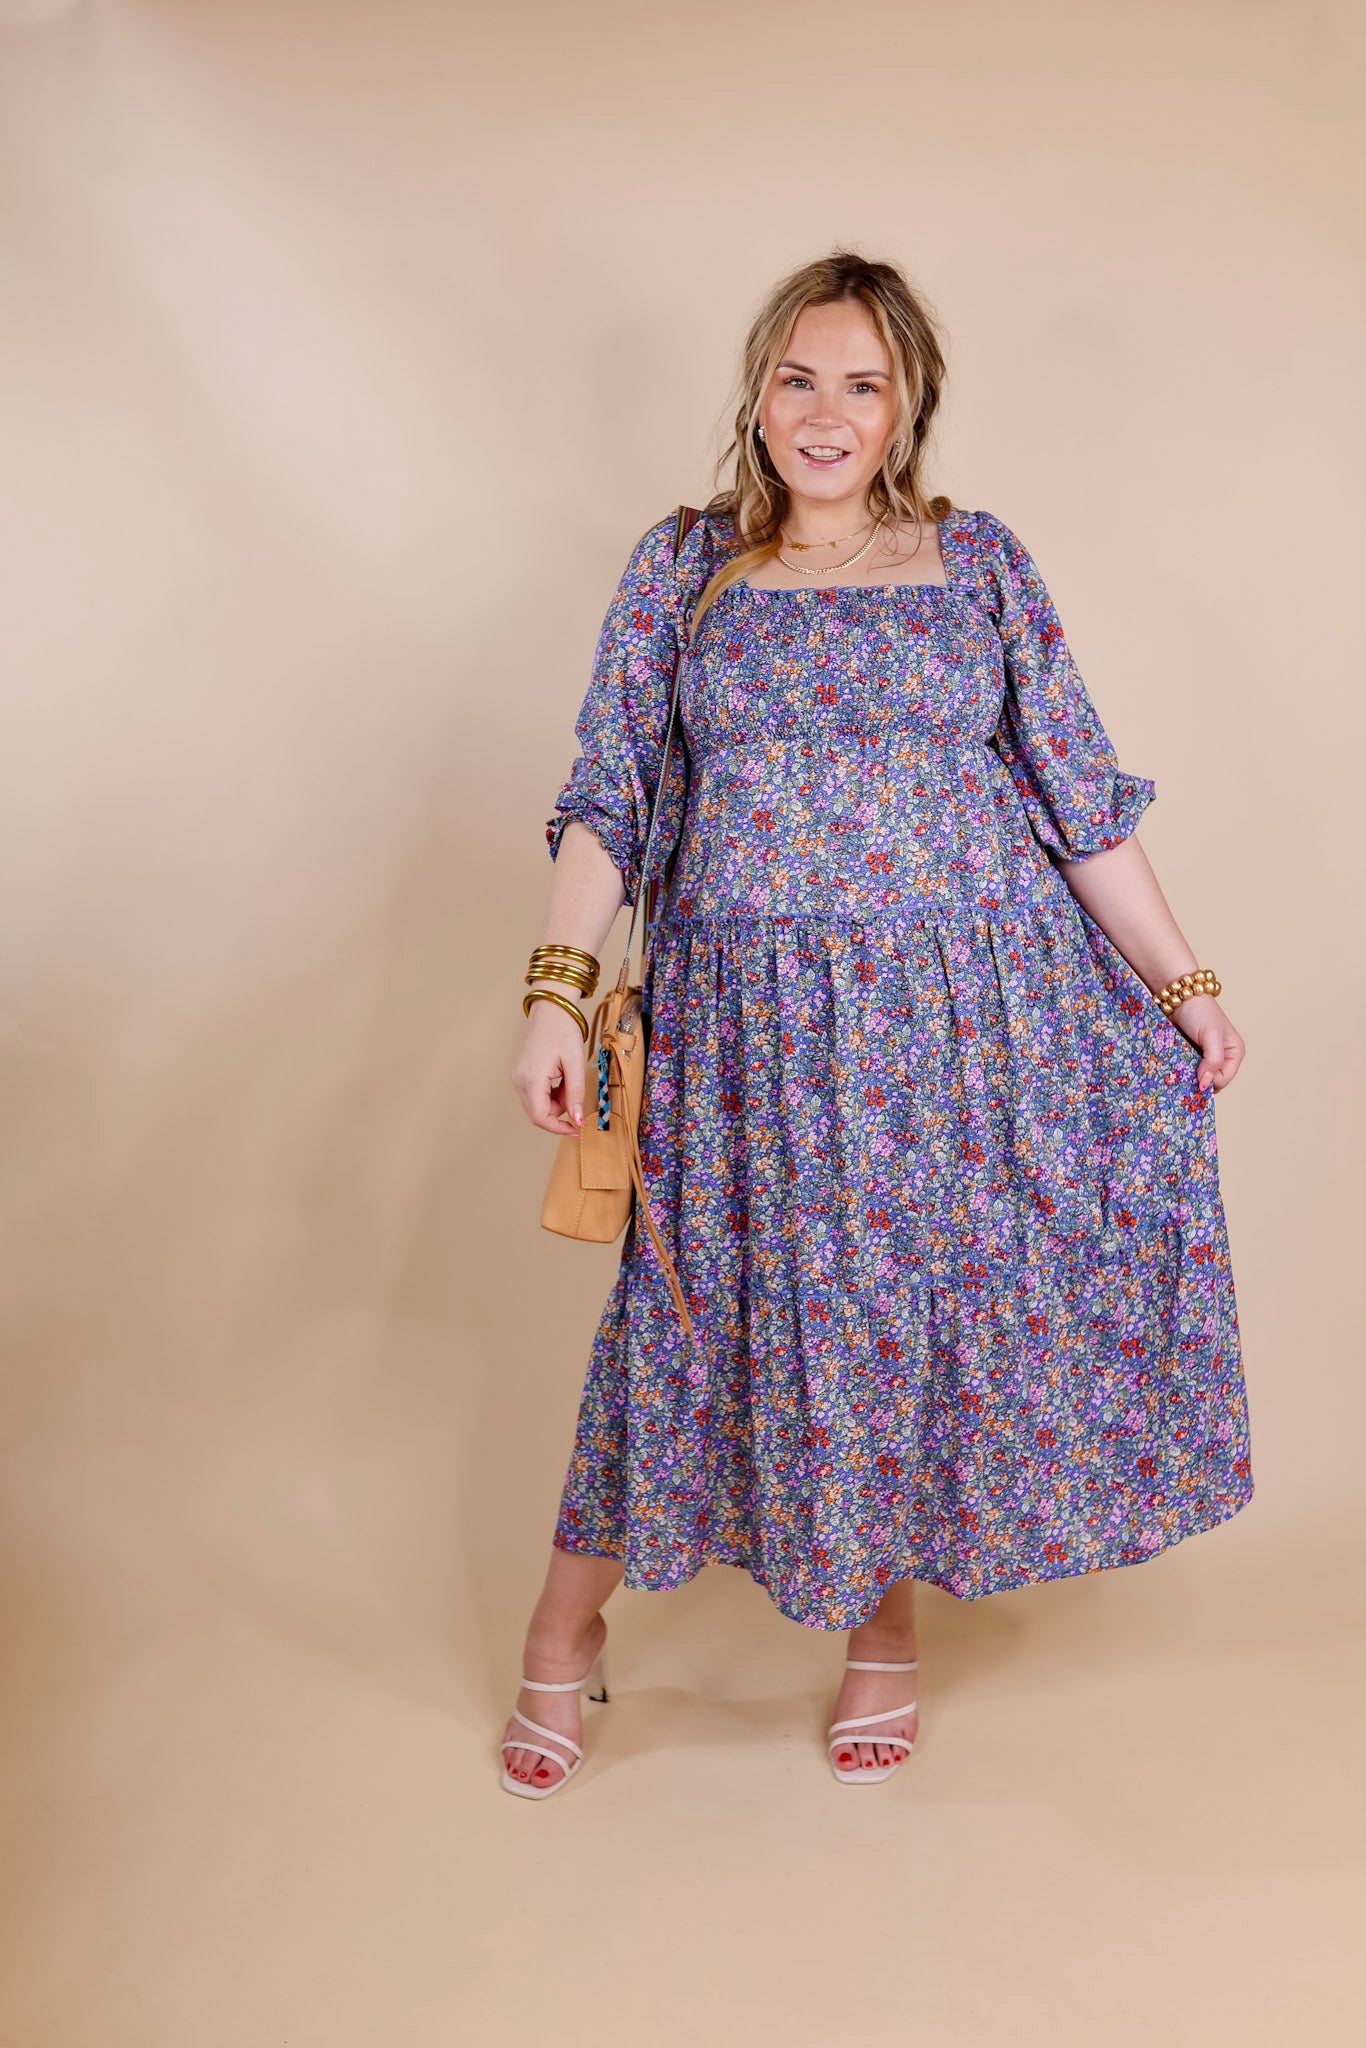 Spring Blooms Smocked Floral Maxi Dress in Blue - Giddy Up Glamour Boutique